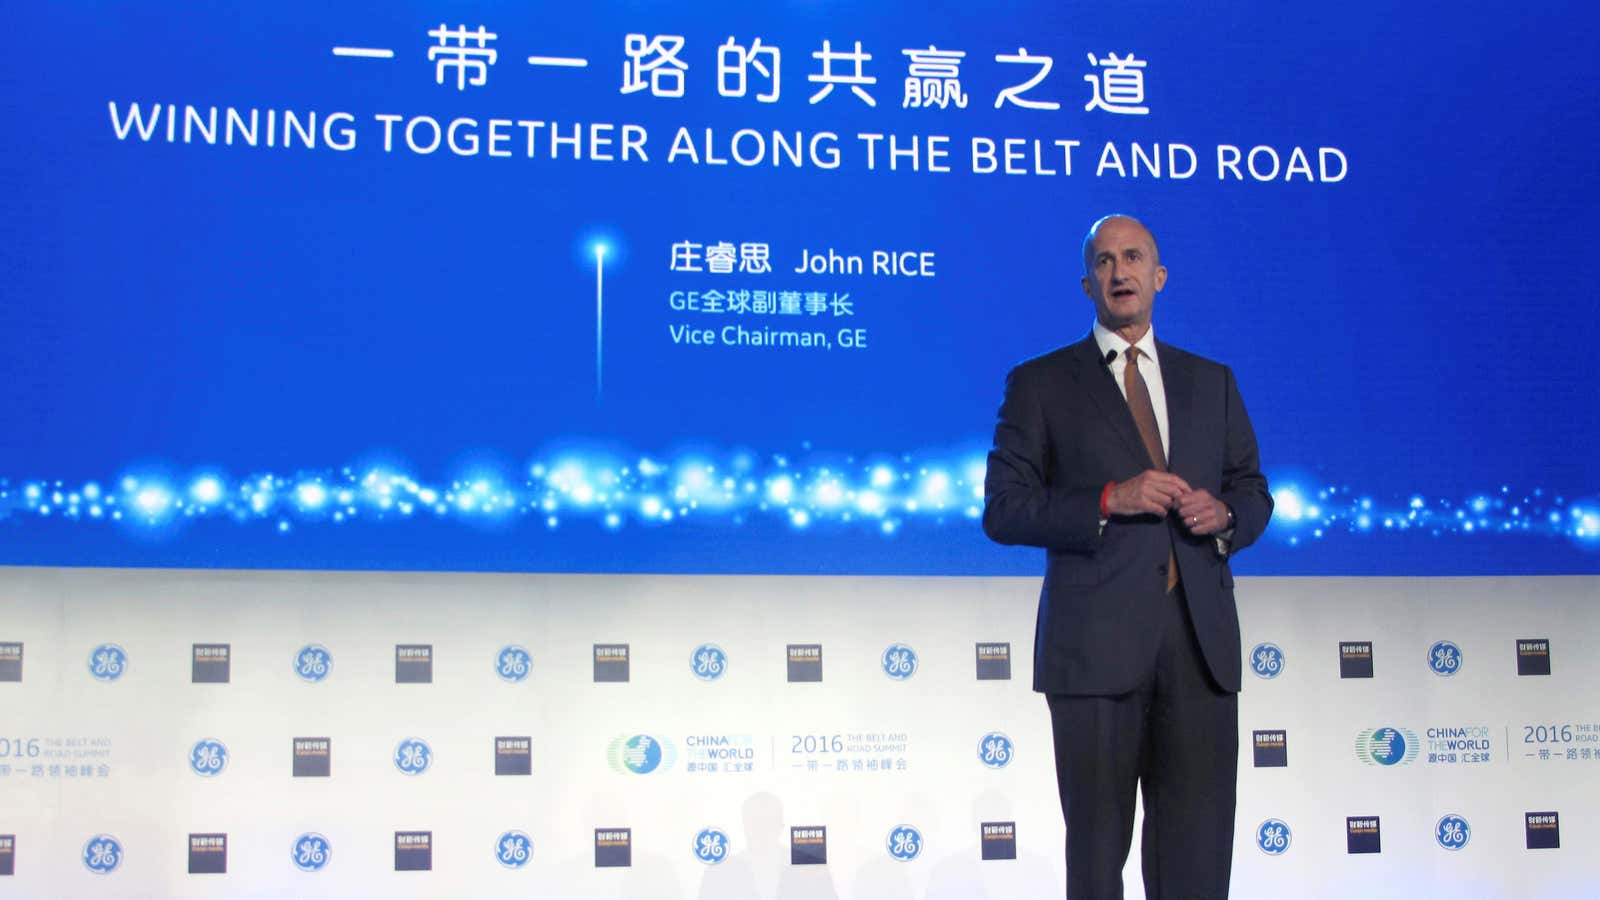 John Rice, a vice-president of GE, speaks during an event in Beijing.